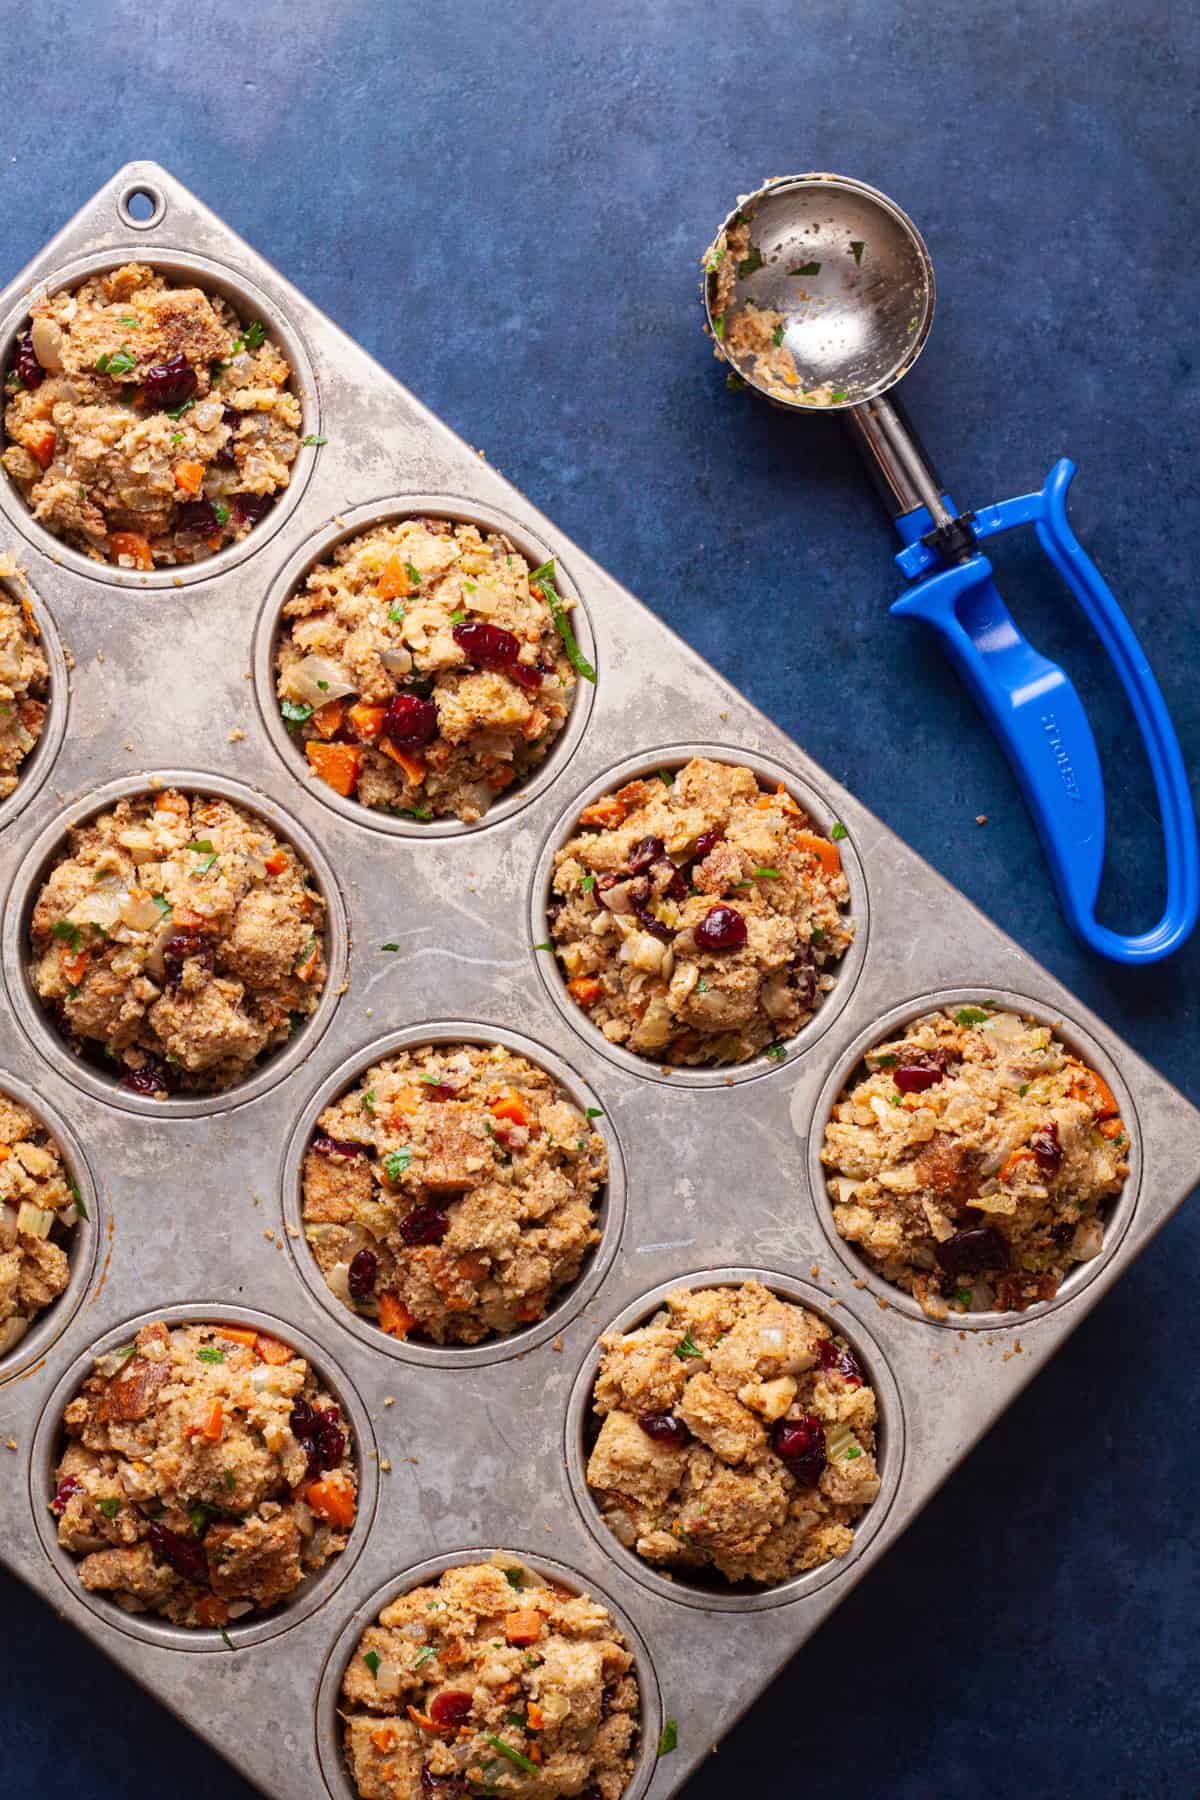 diving the walnut and cranberry stuffing into a muffin tin for baking